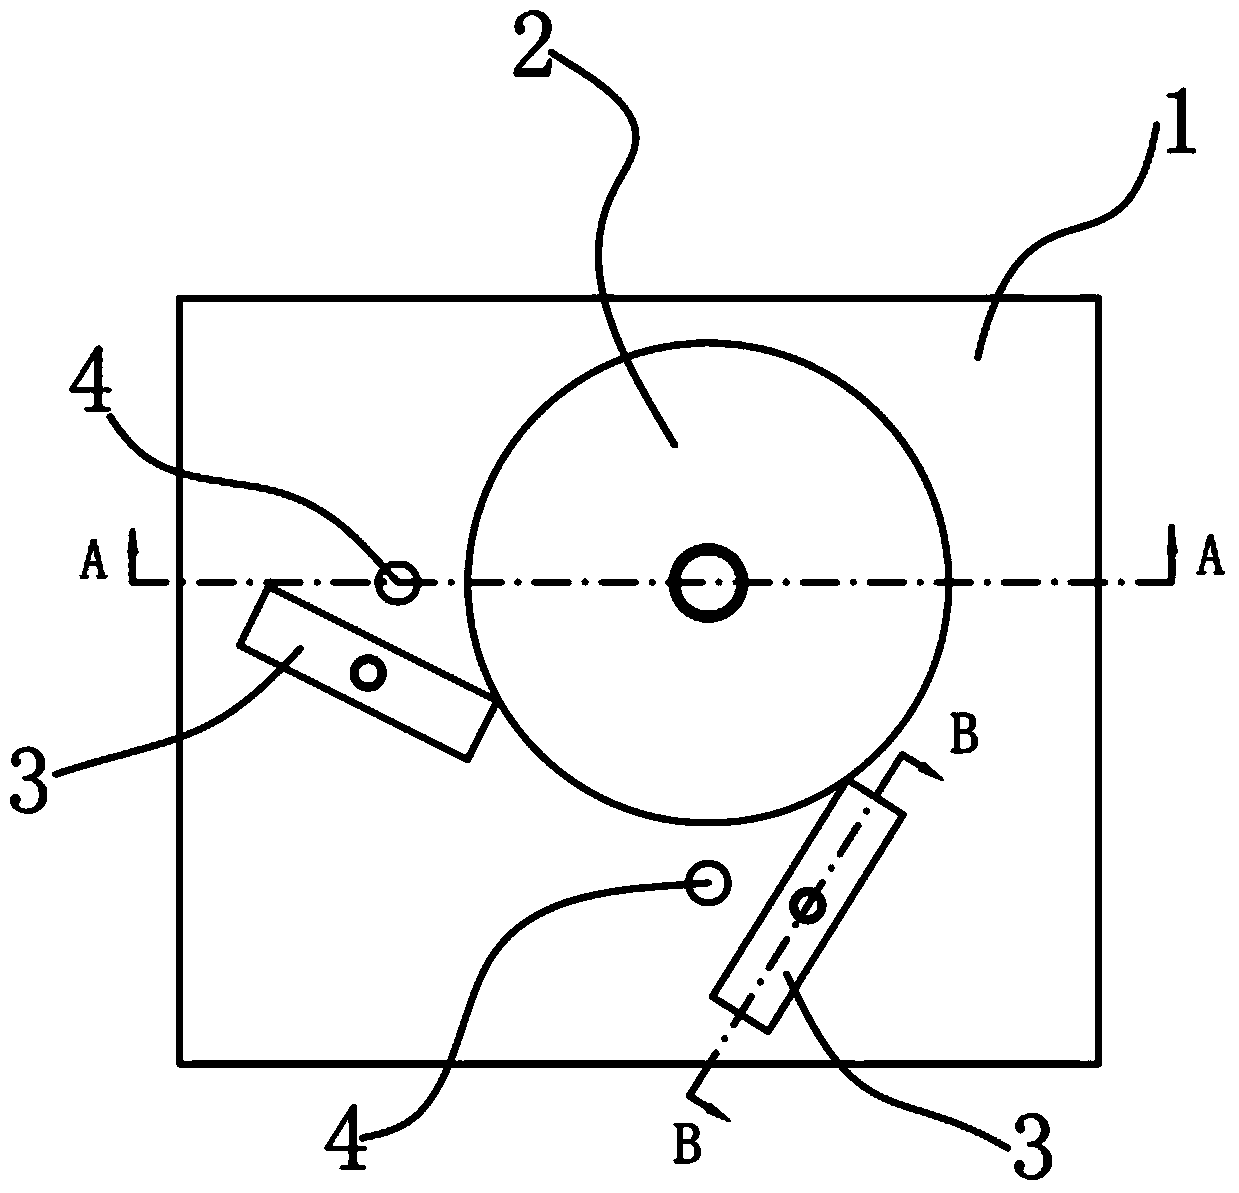 Motion conversion experiment device in thermodynamic system